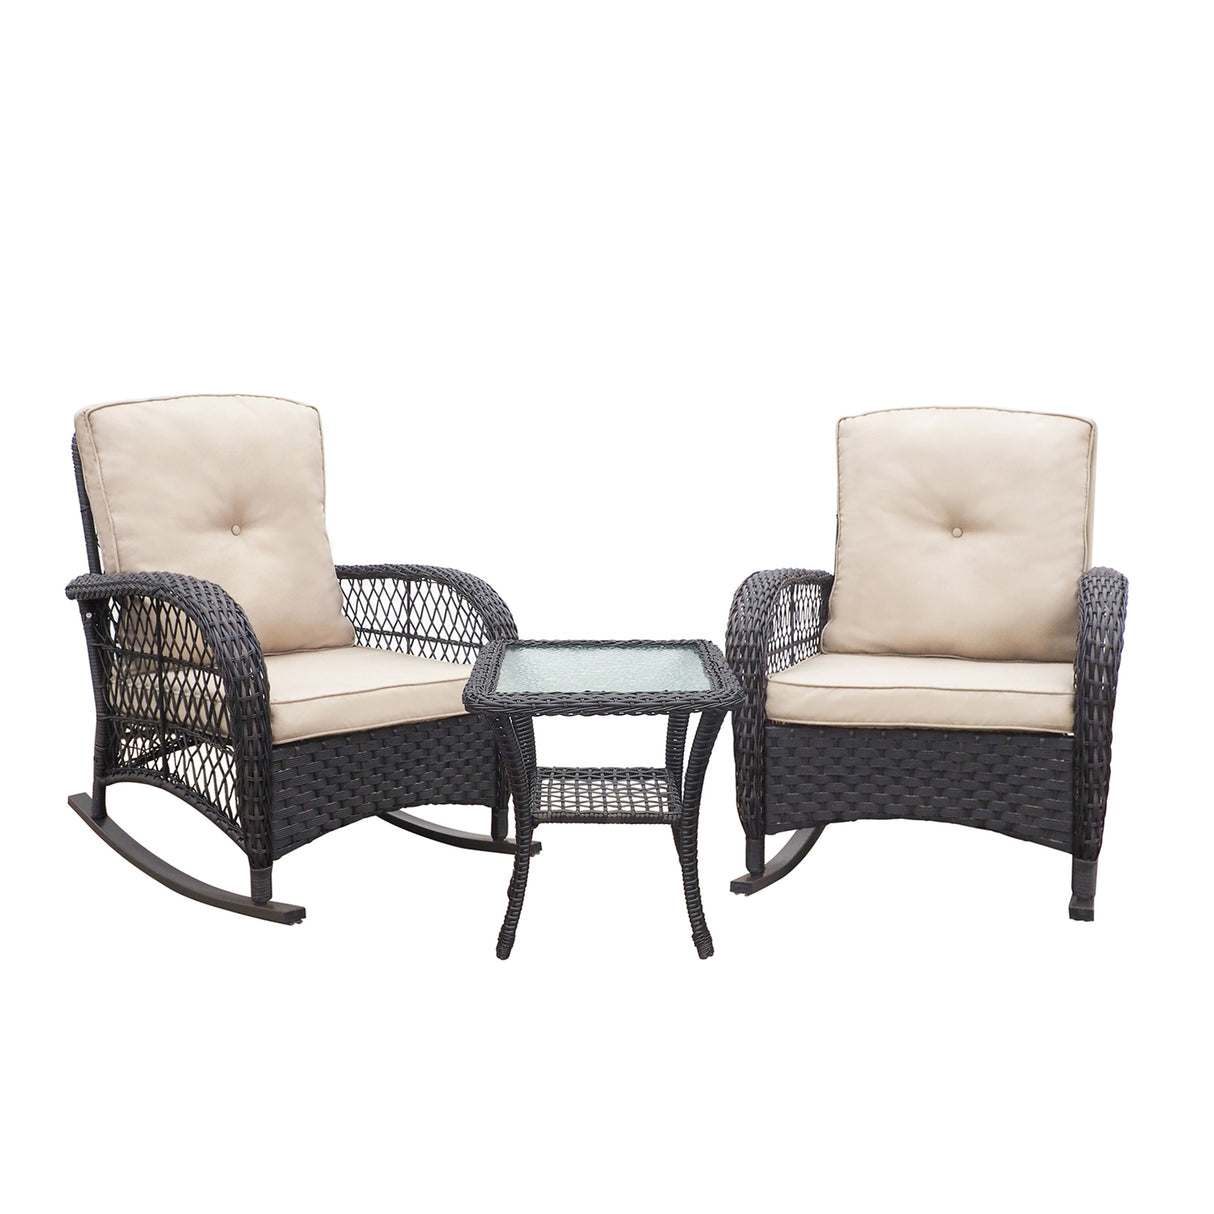 3 Pieces Conversation Set, Outdoor Wicker Rocker Patio Bistro Set,  Rocking Chair with Glass Top Side Table